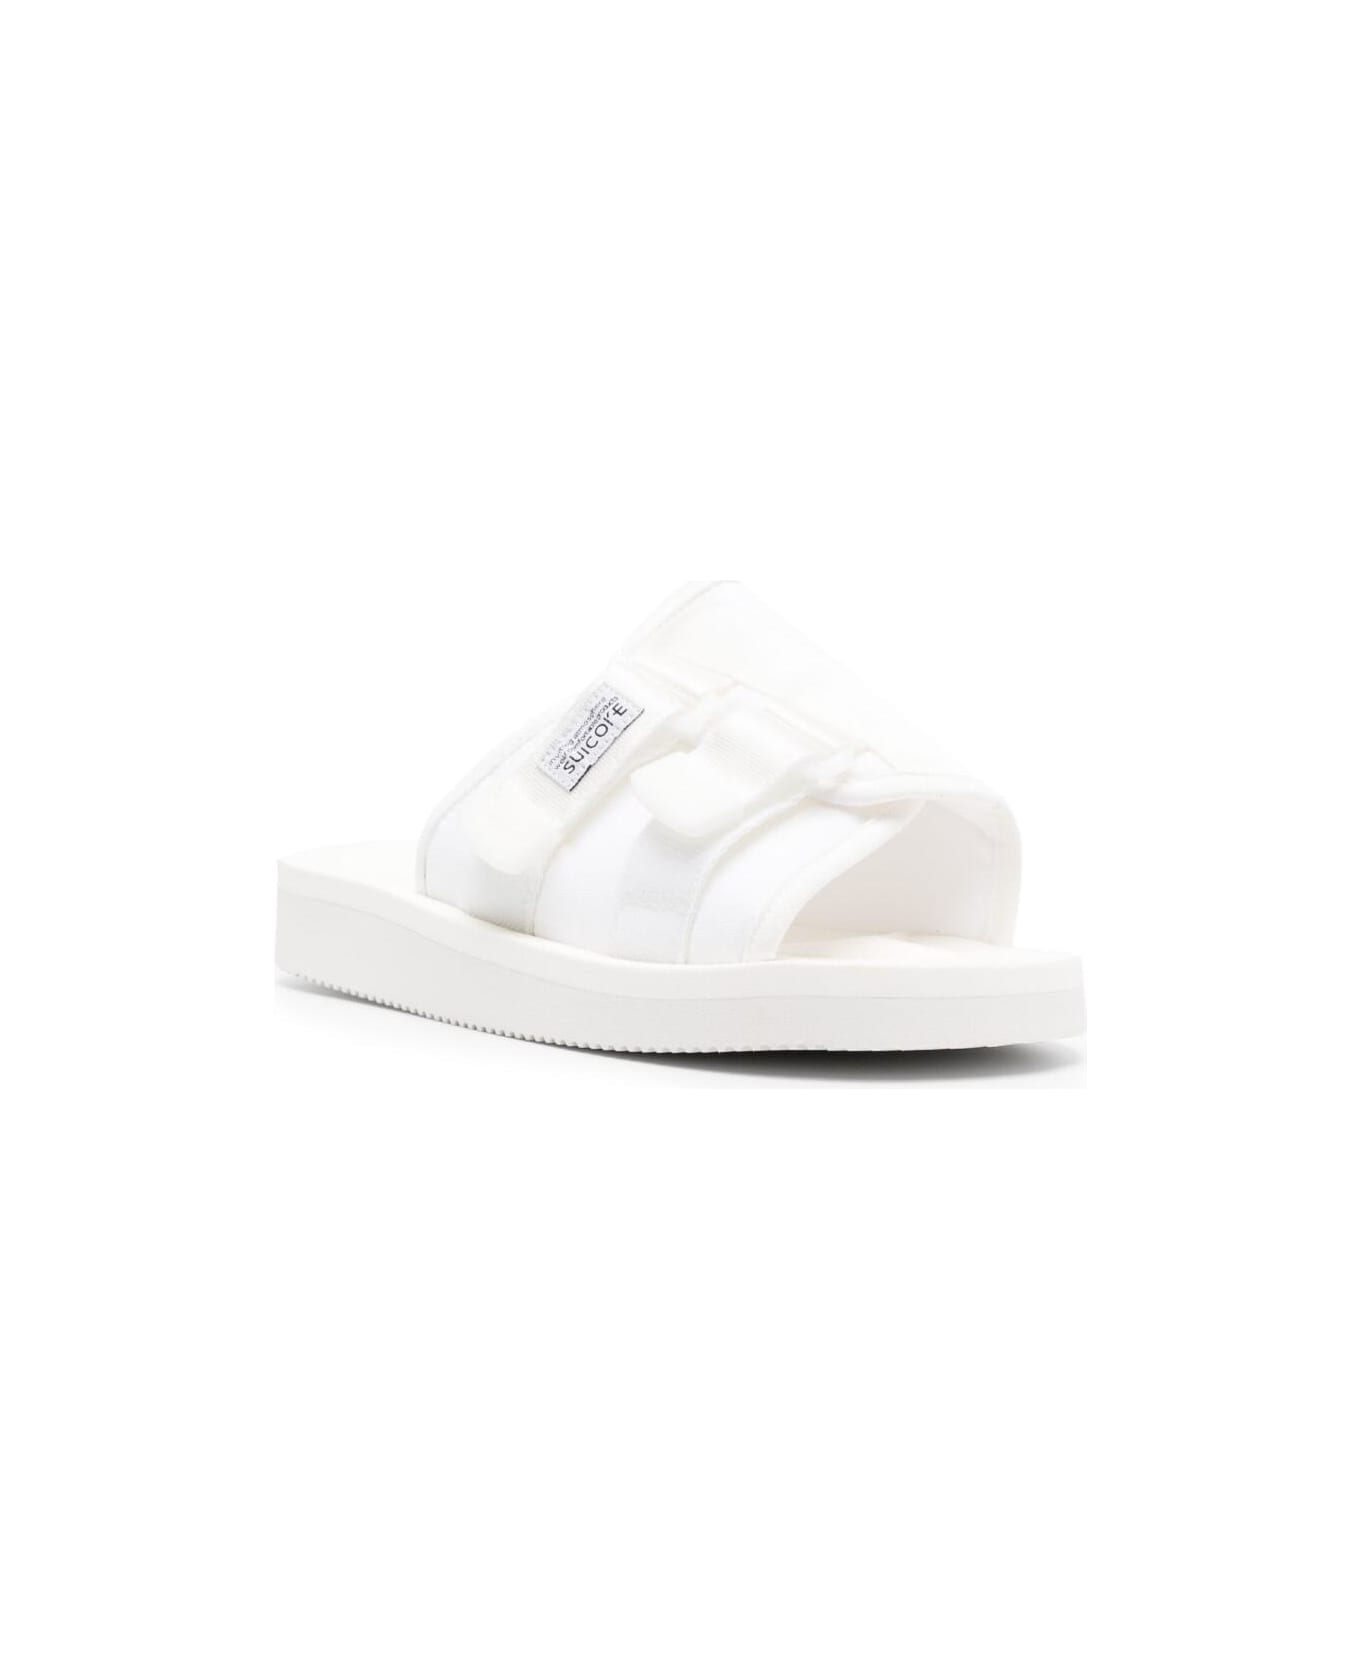 SUICOKE 'kaw-cab' White Sandals With Velcro Fastening In Nylon Woman Suicoke - White